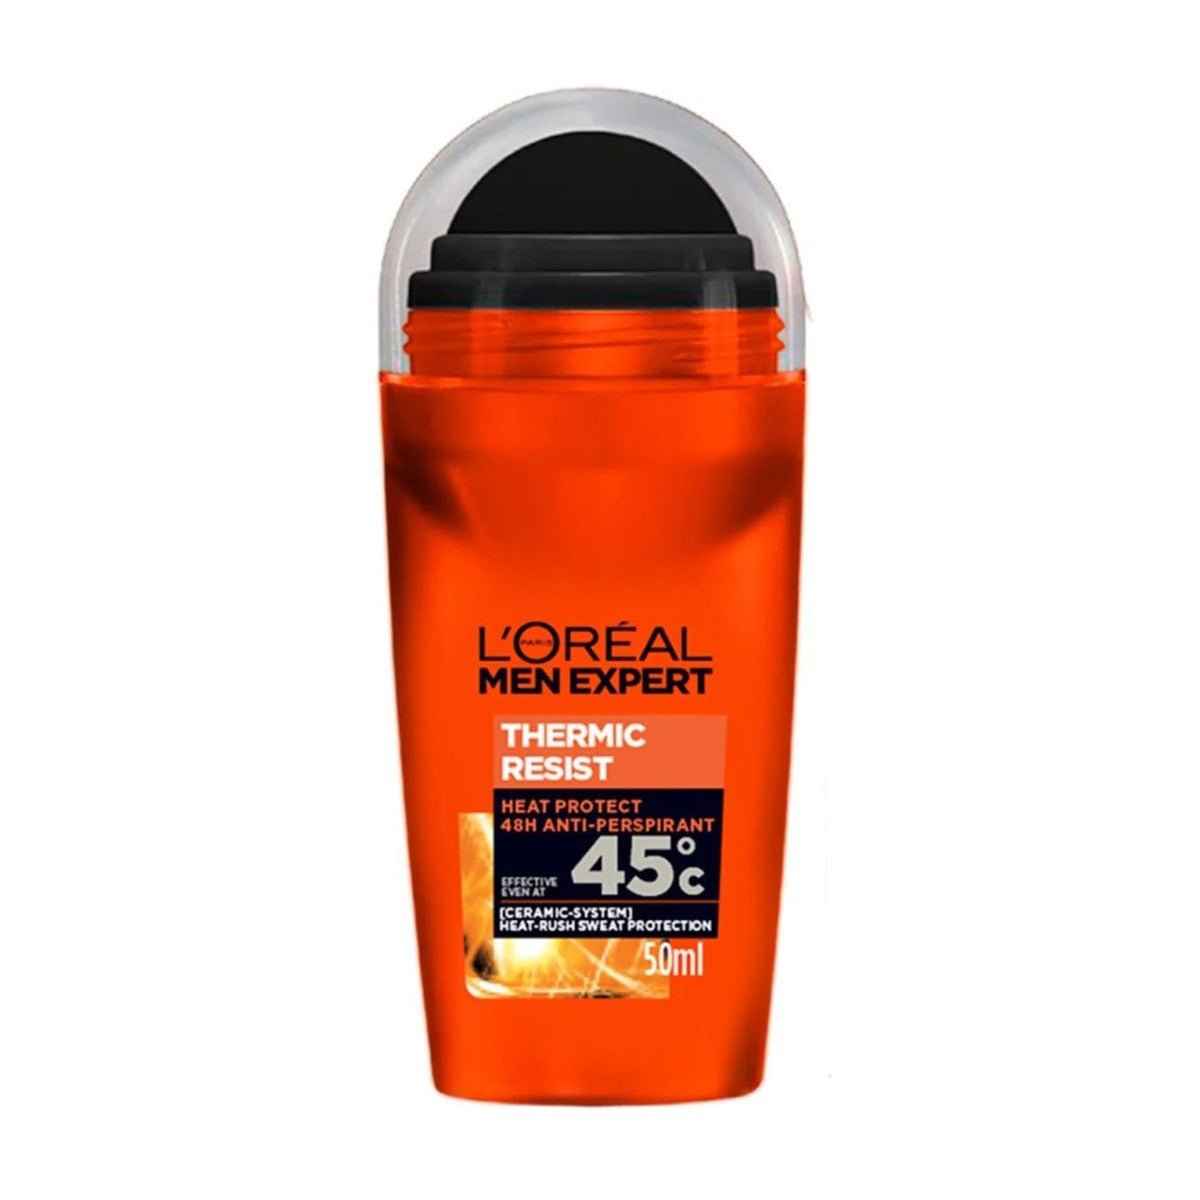 L'Oreal Men Expert Thermic Resist Heat Protect 48H Anti-Perspirant Roll On – 50ml - Bloom Pharmacy